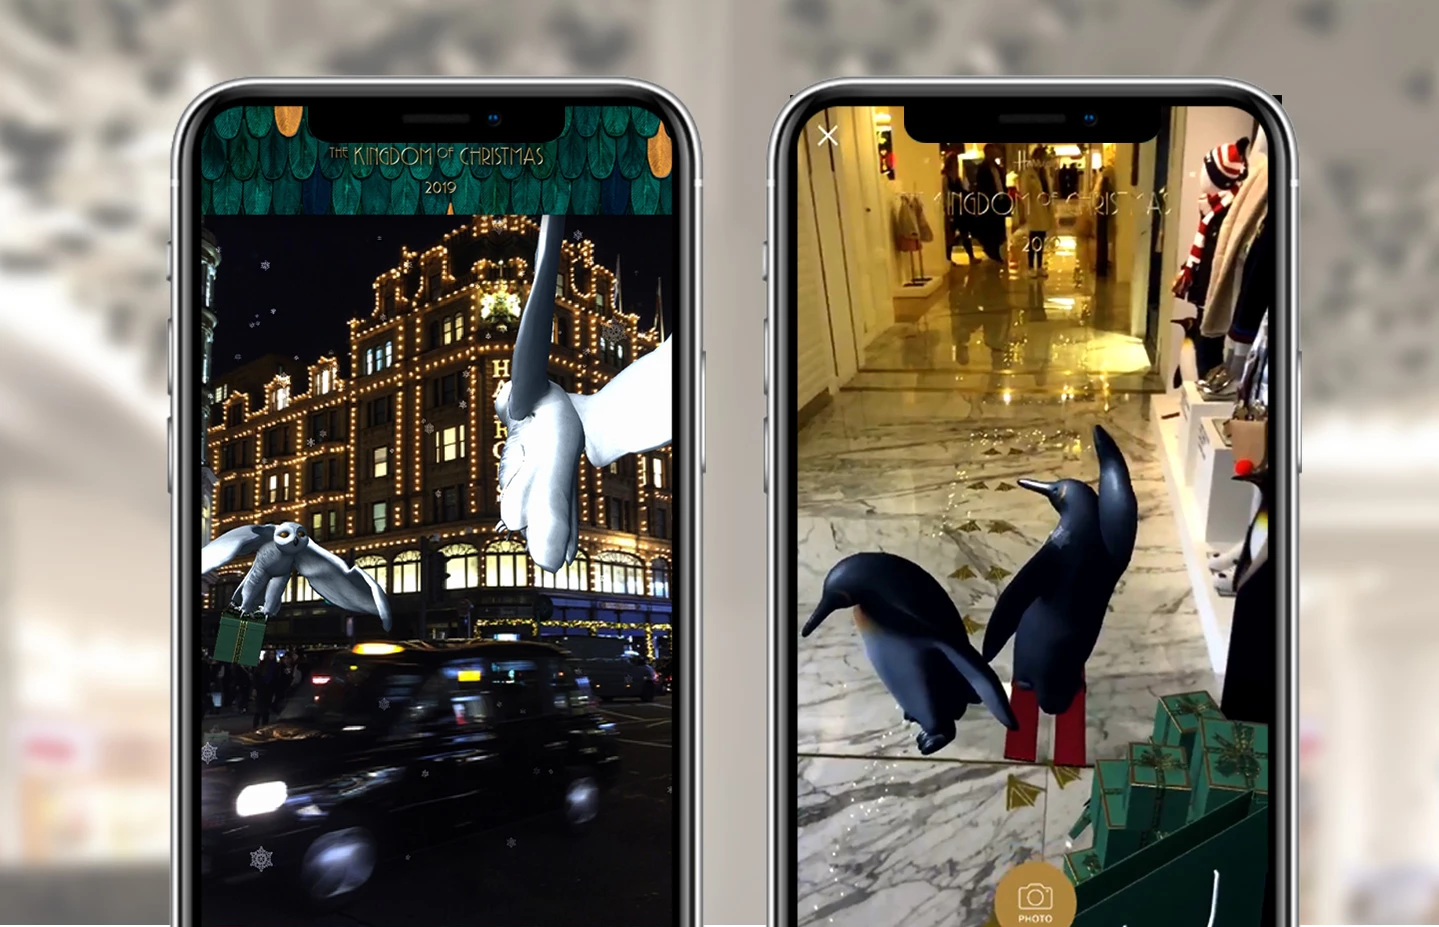 A christmas experience in Augmented reality on a phone